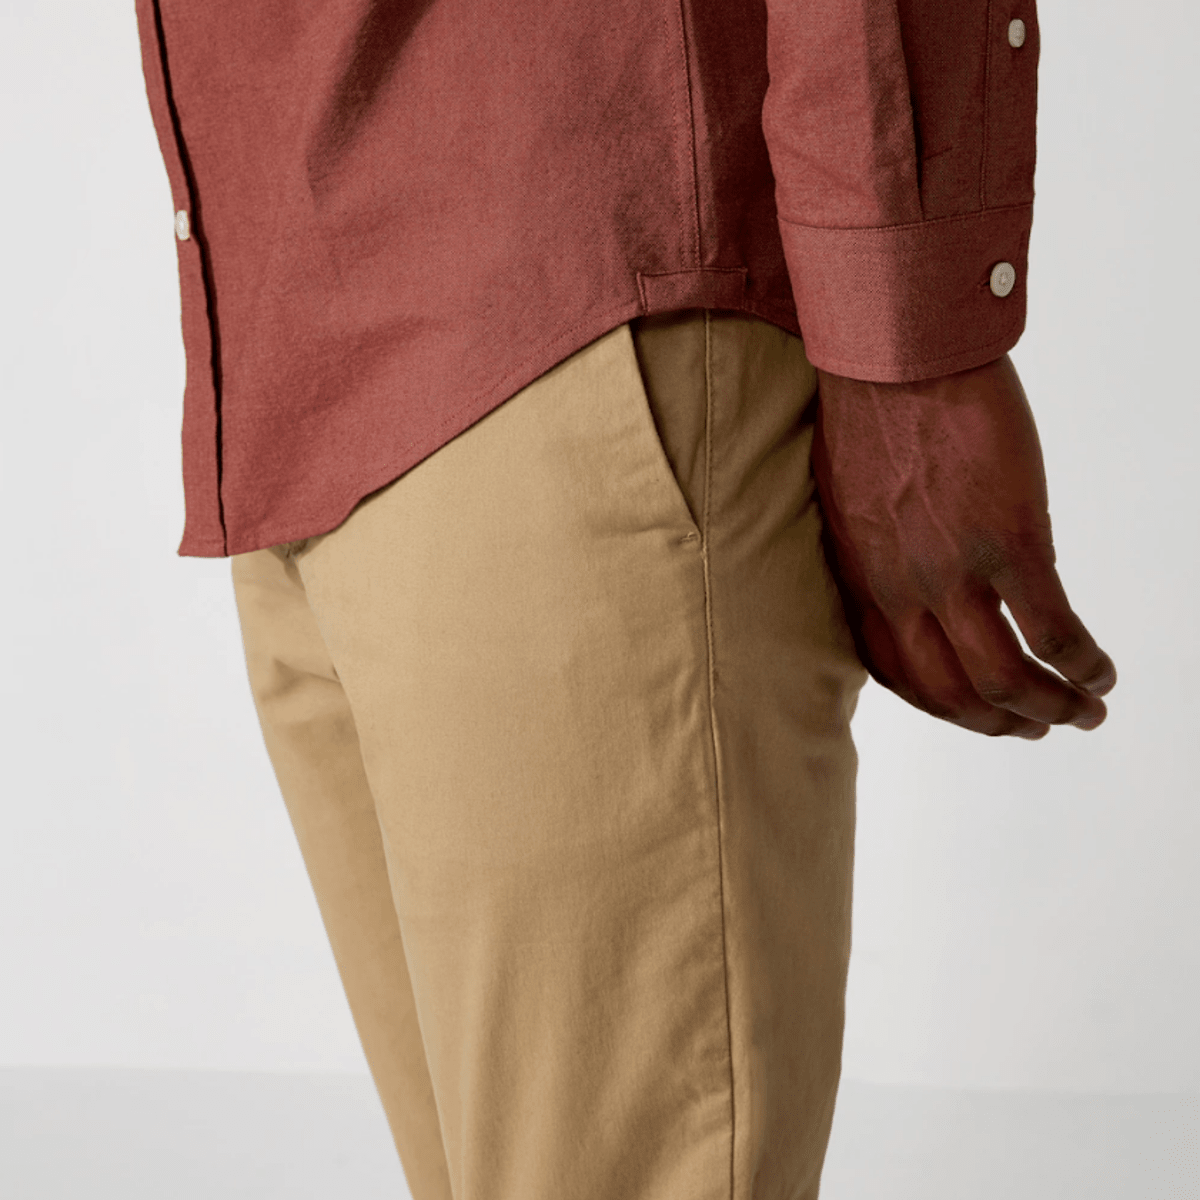 The World's Most Comfortable Business Pants - Men's Journal